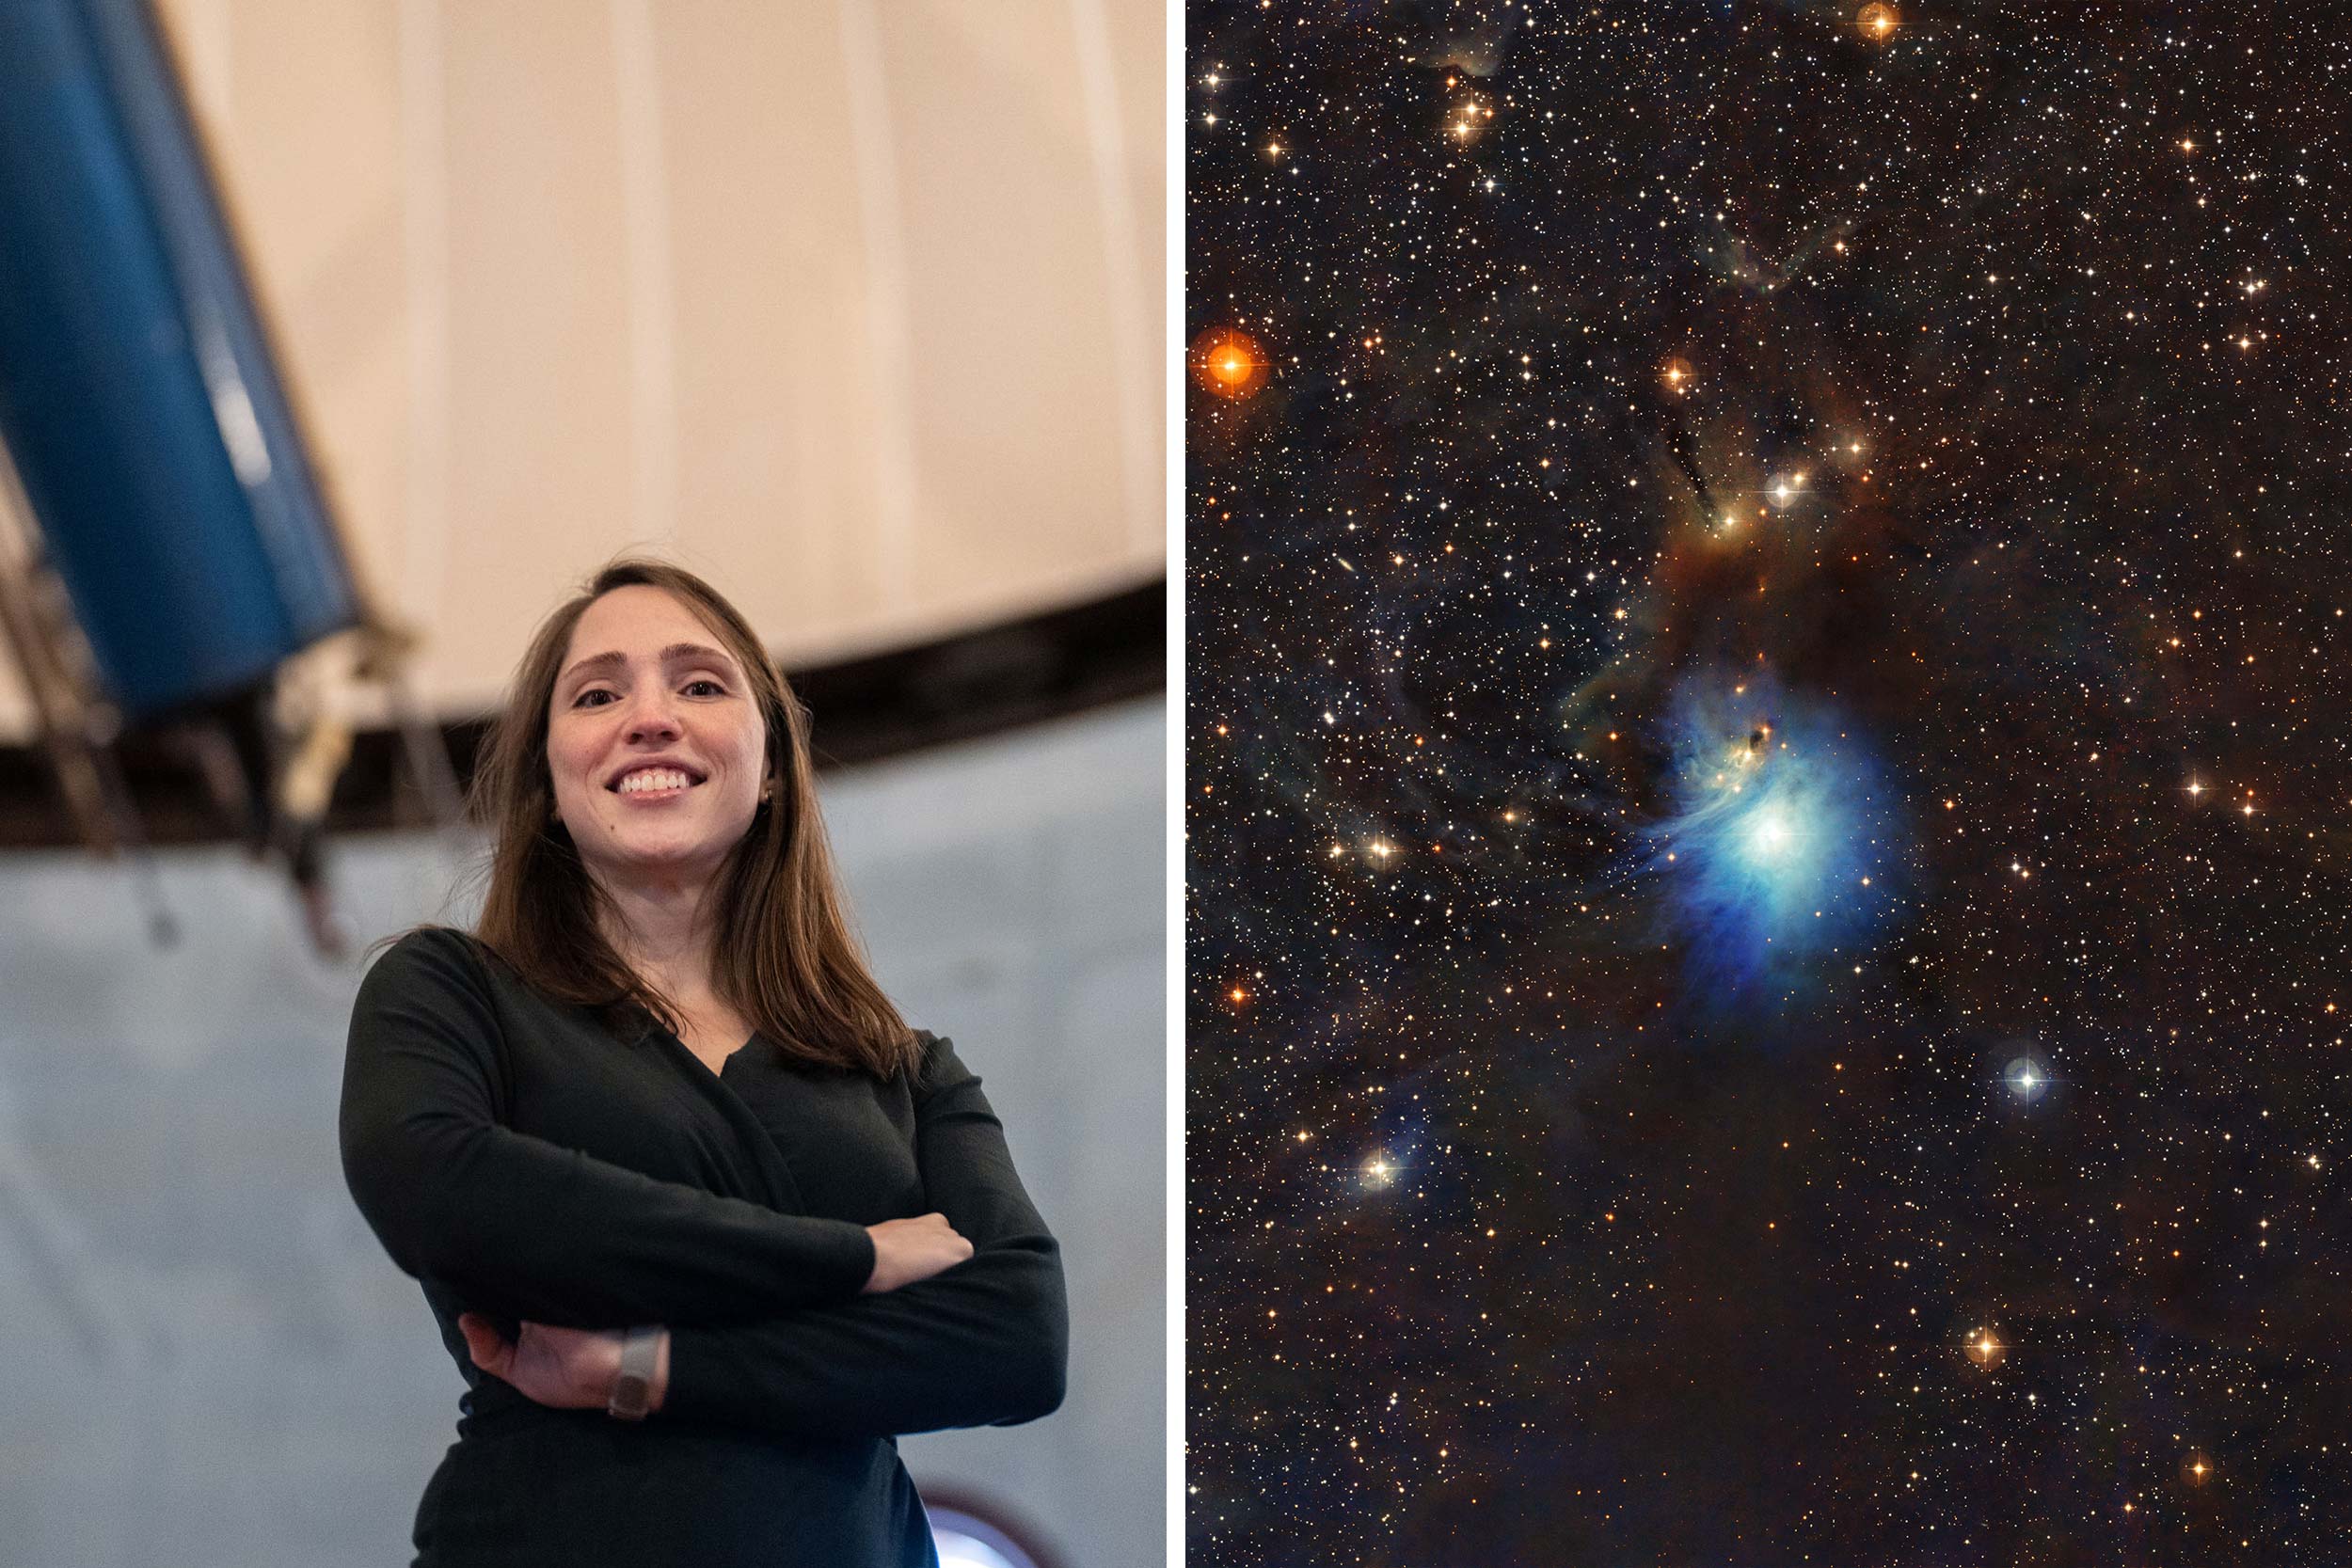 Ilsa Cleeves stands in front of UVA's Leander McCormick Telescope, and a bright blue cloud shines, surrounded by dust and multicolored stars